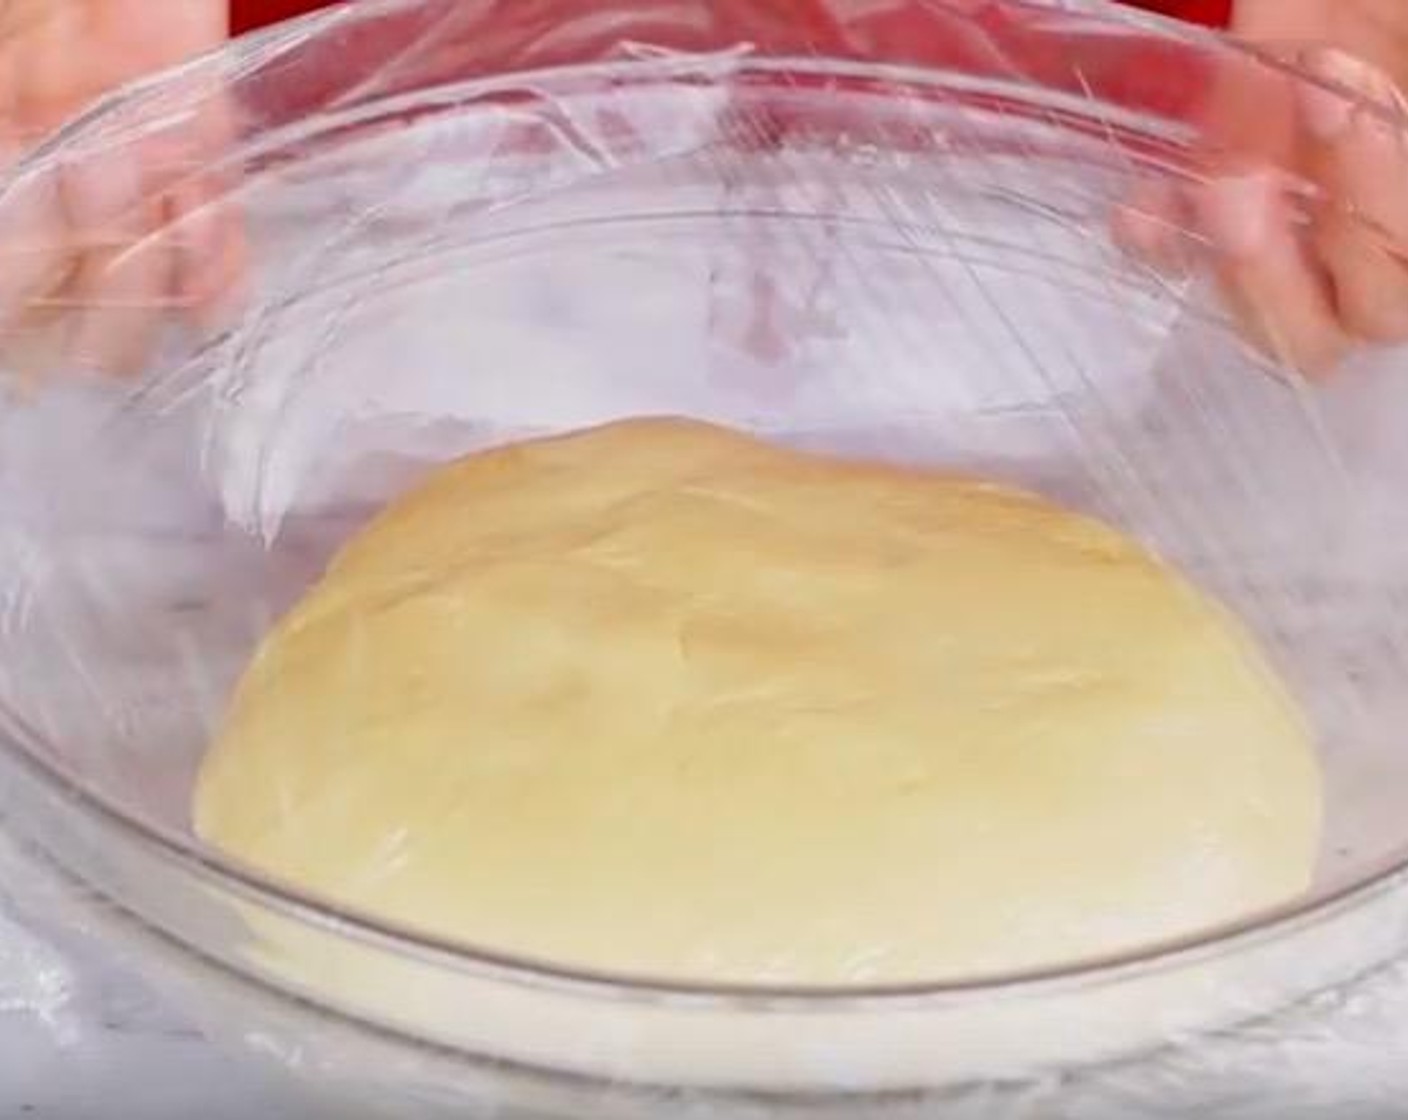 step 6 Form dough into a ball and place in a bowl greased with oil. Coat the top and bottom of the dough with oil. Cover with plastic wrap and a dish towel. Place somewhere warm and let rise for 1 1/2-3 hours.